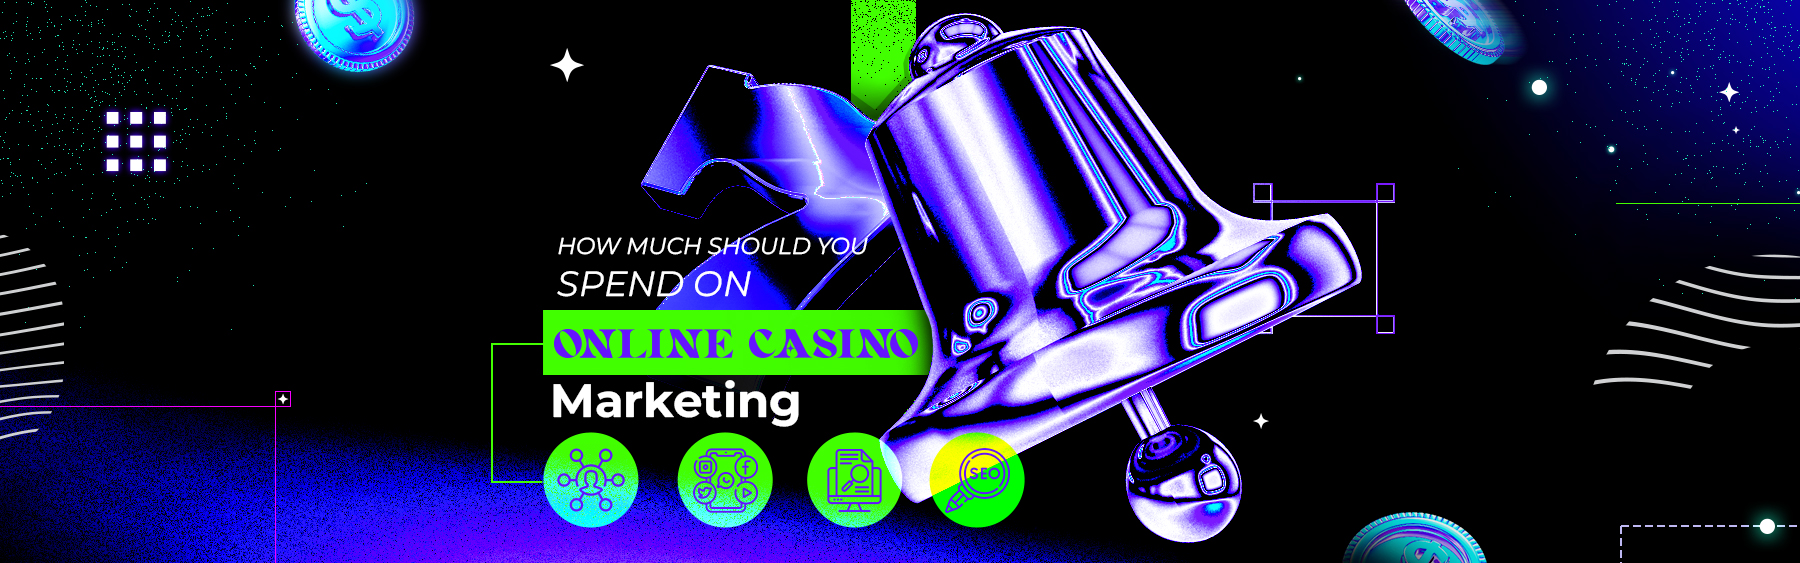 How much should you spend on online casino marketing